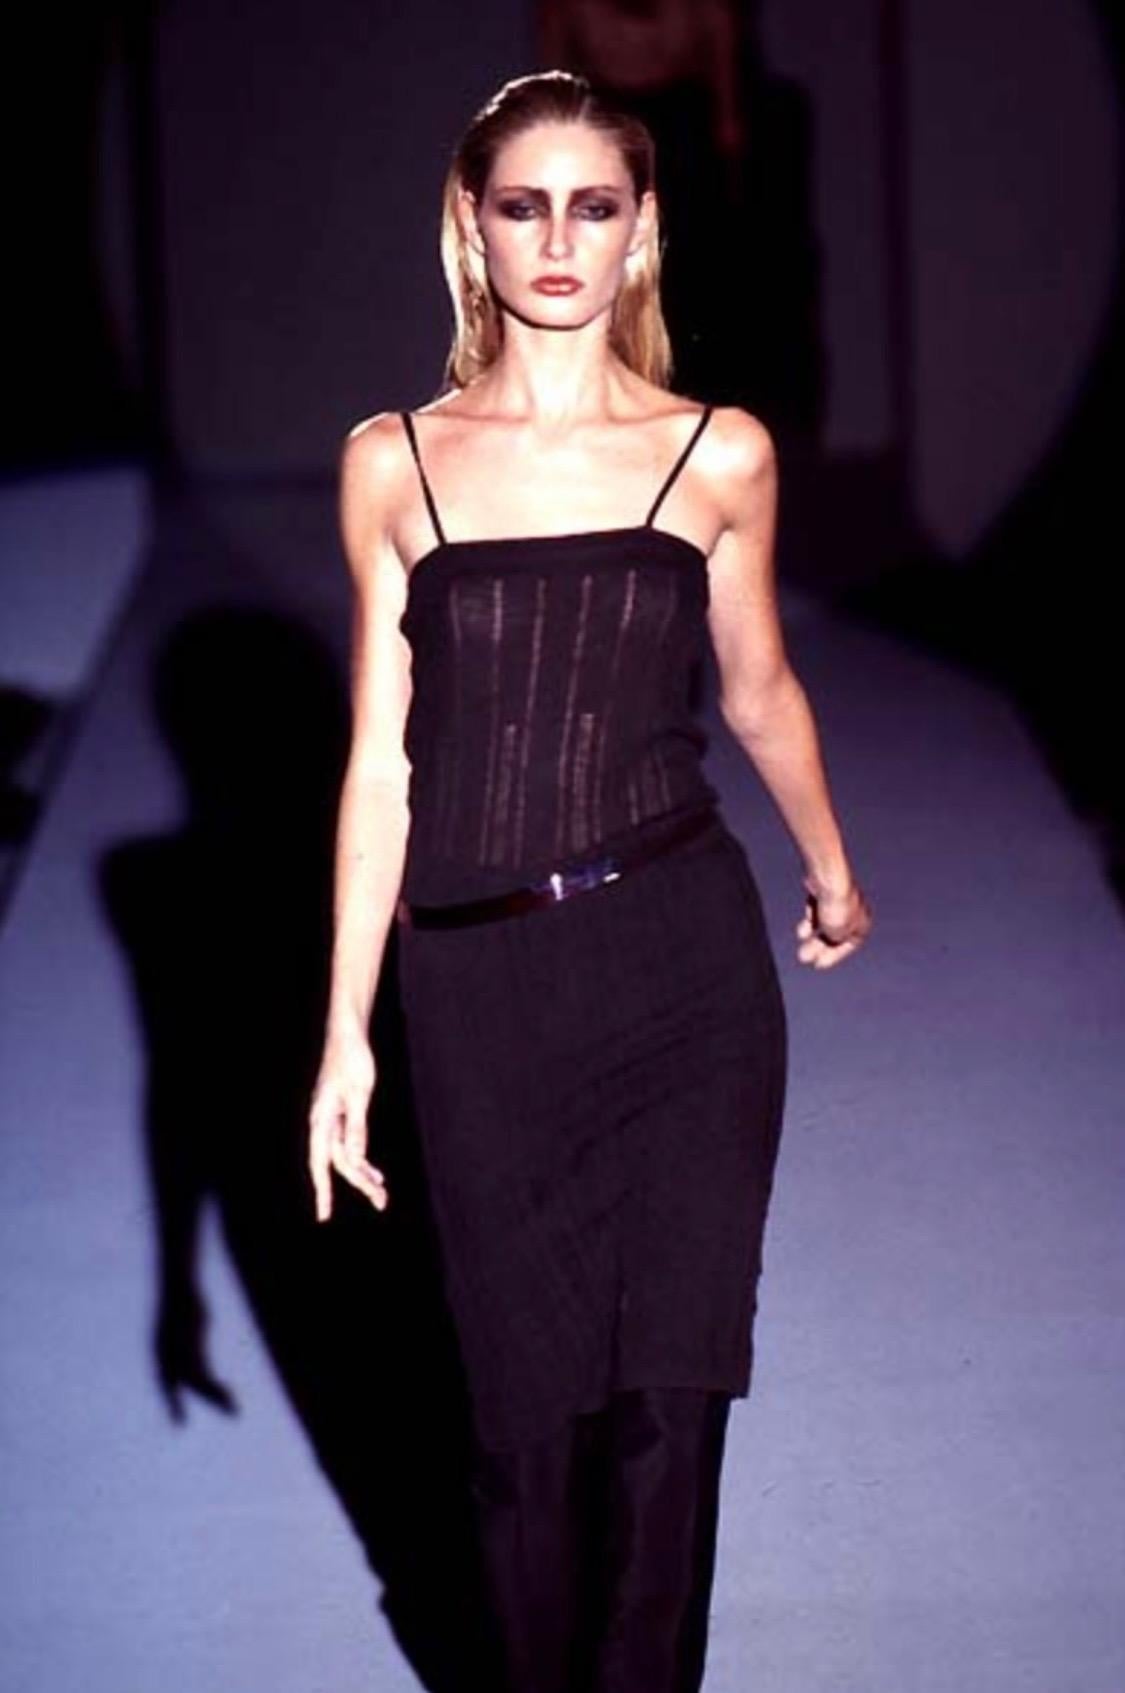 TheRealList presents: a sheer sleeveless dress designed by Tom Ford for Gucci's Spring/Summer 1997 collection. The knit wool blend stretches to hug the body in all of the right places. This Tom Ford classic debuted on the season's runway, but